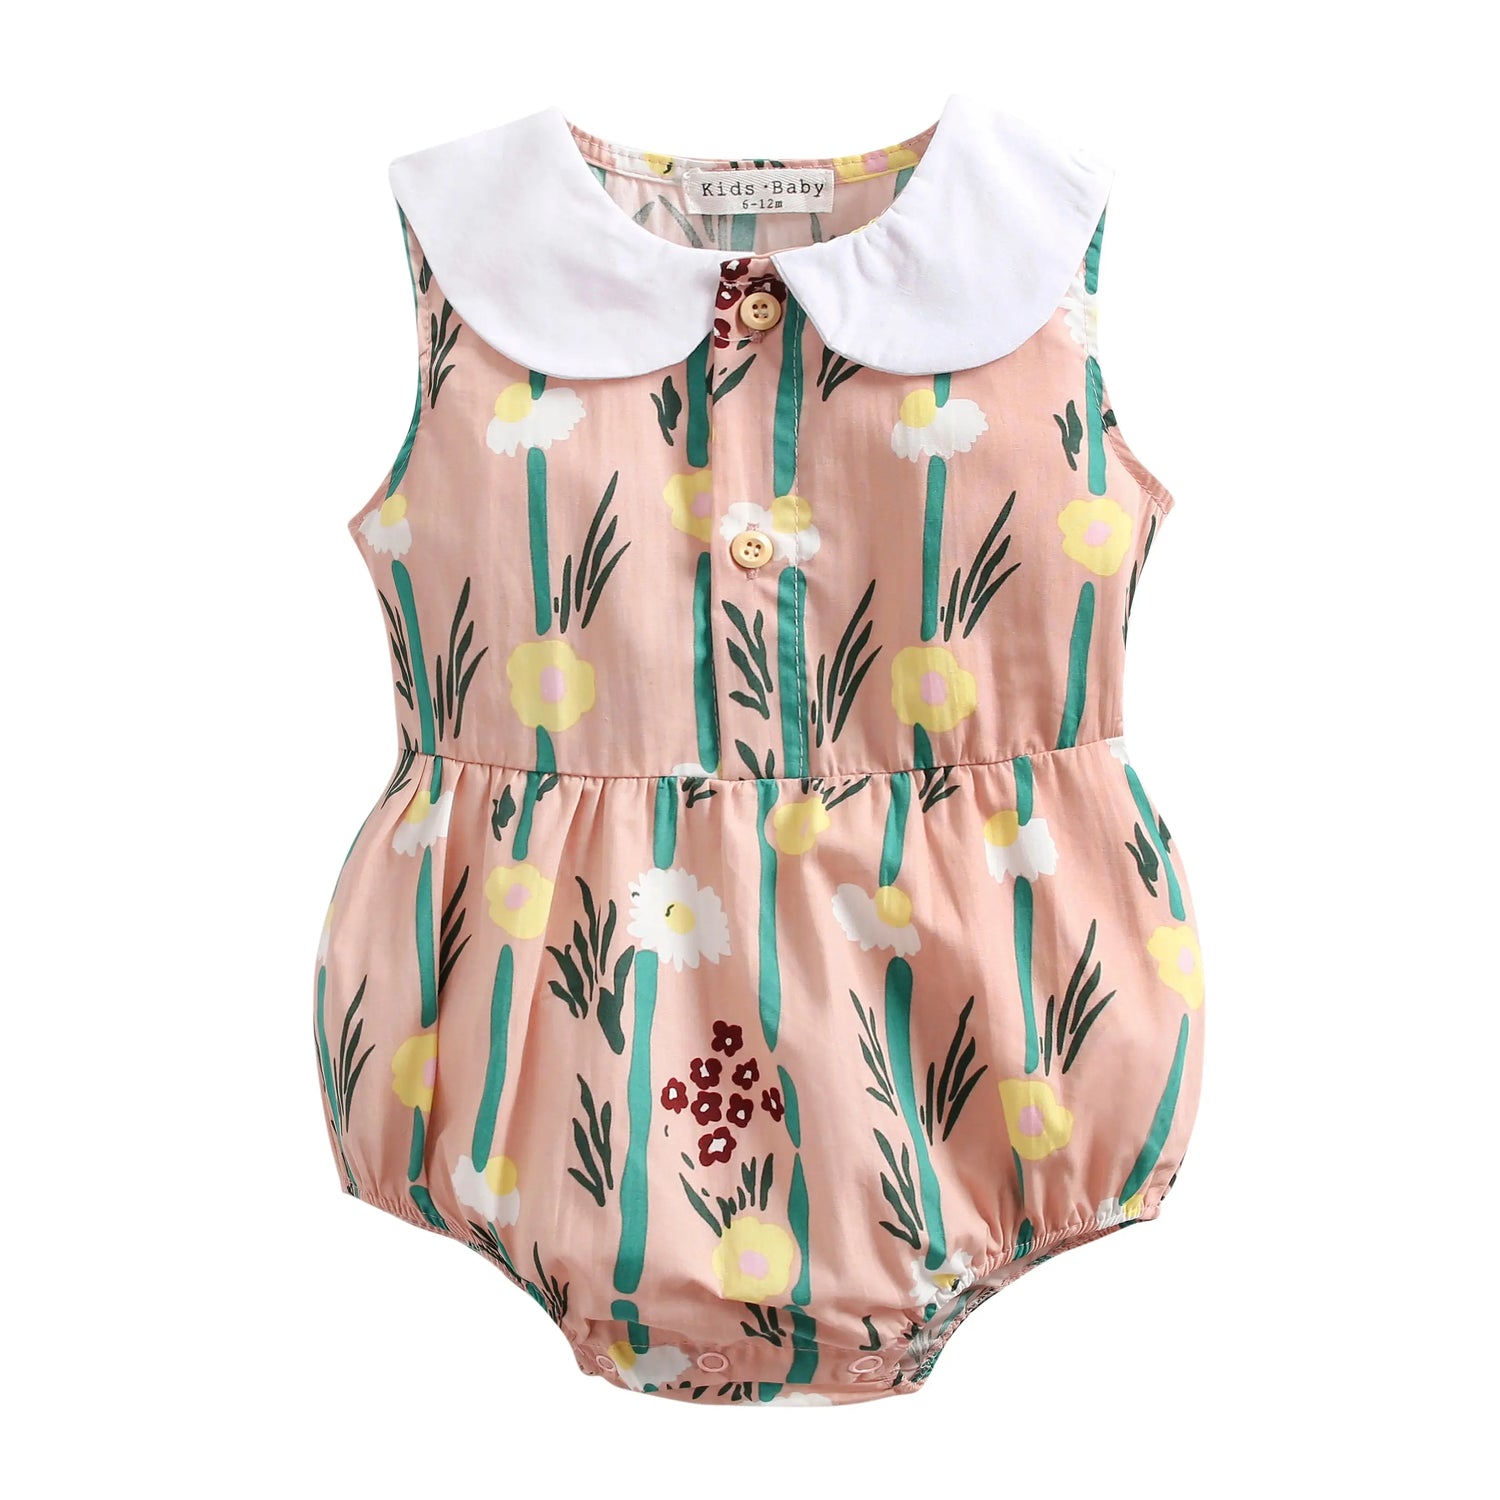 Spring &amp; Summer Baby Onesie by Soulful Trading, with a floral pattern and a white collar, displayed on a white background.